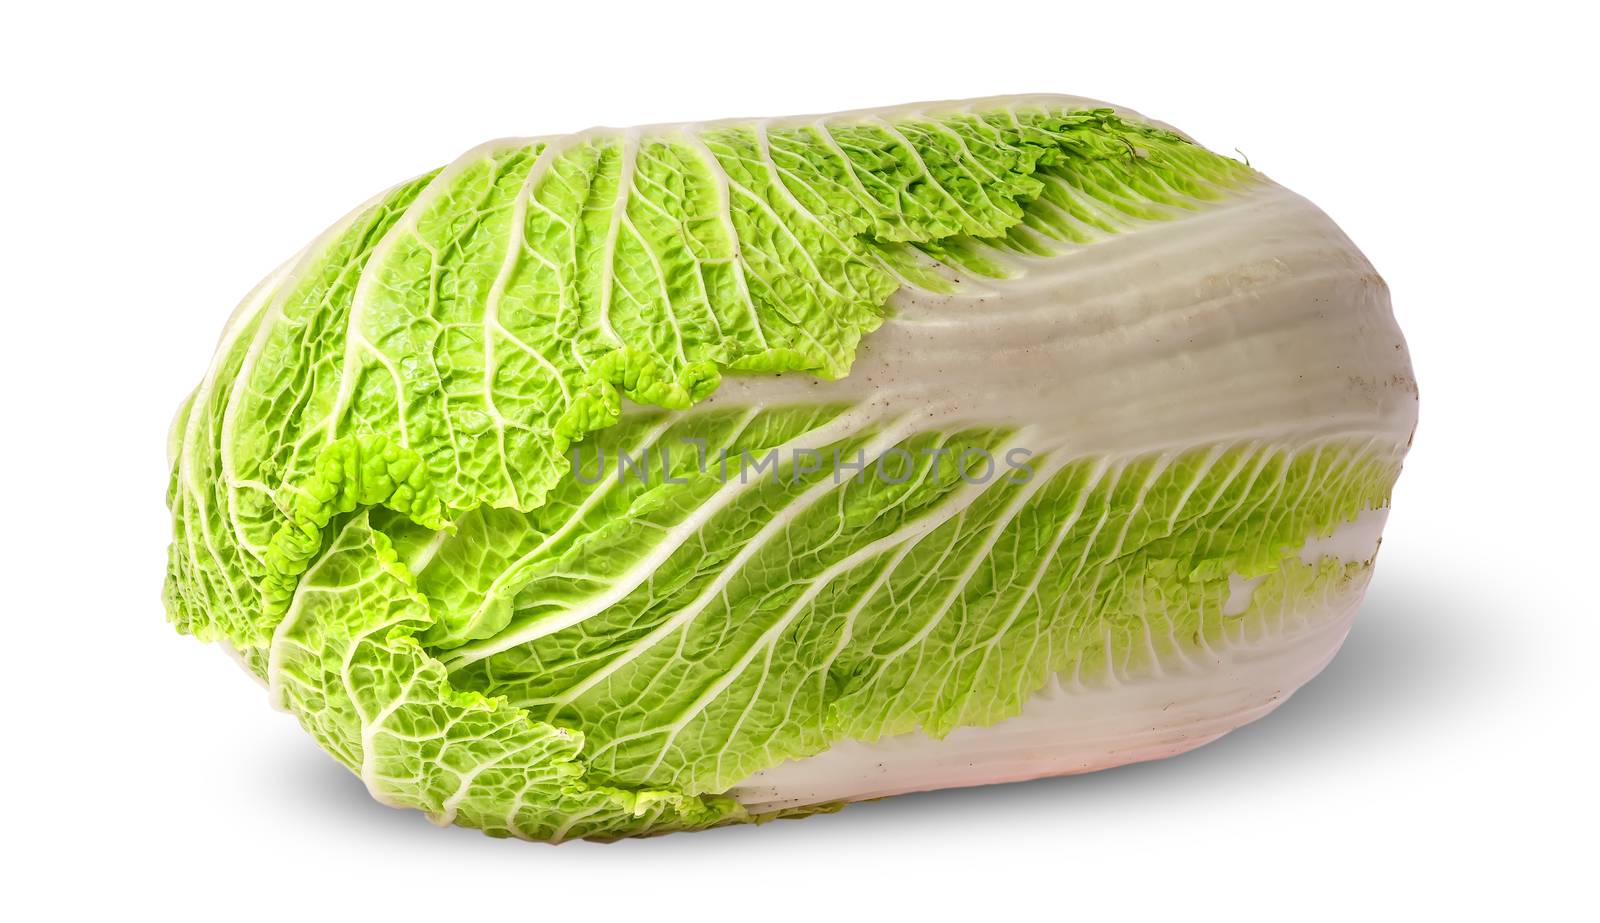 Chinese cabbage horizontally by Cipariss